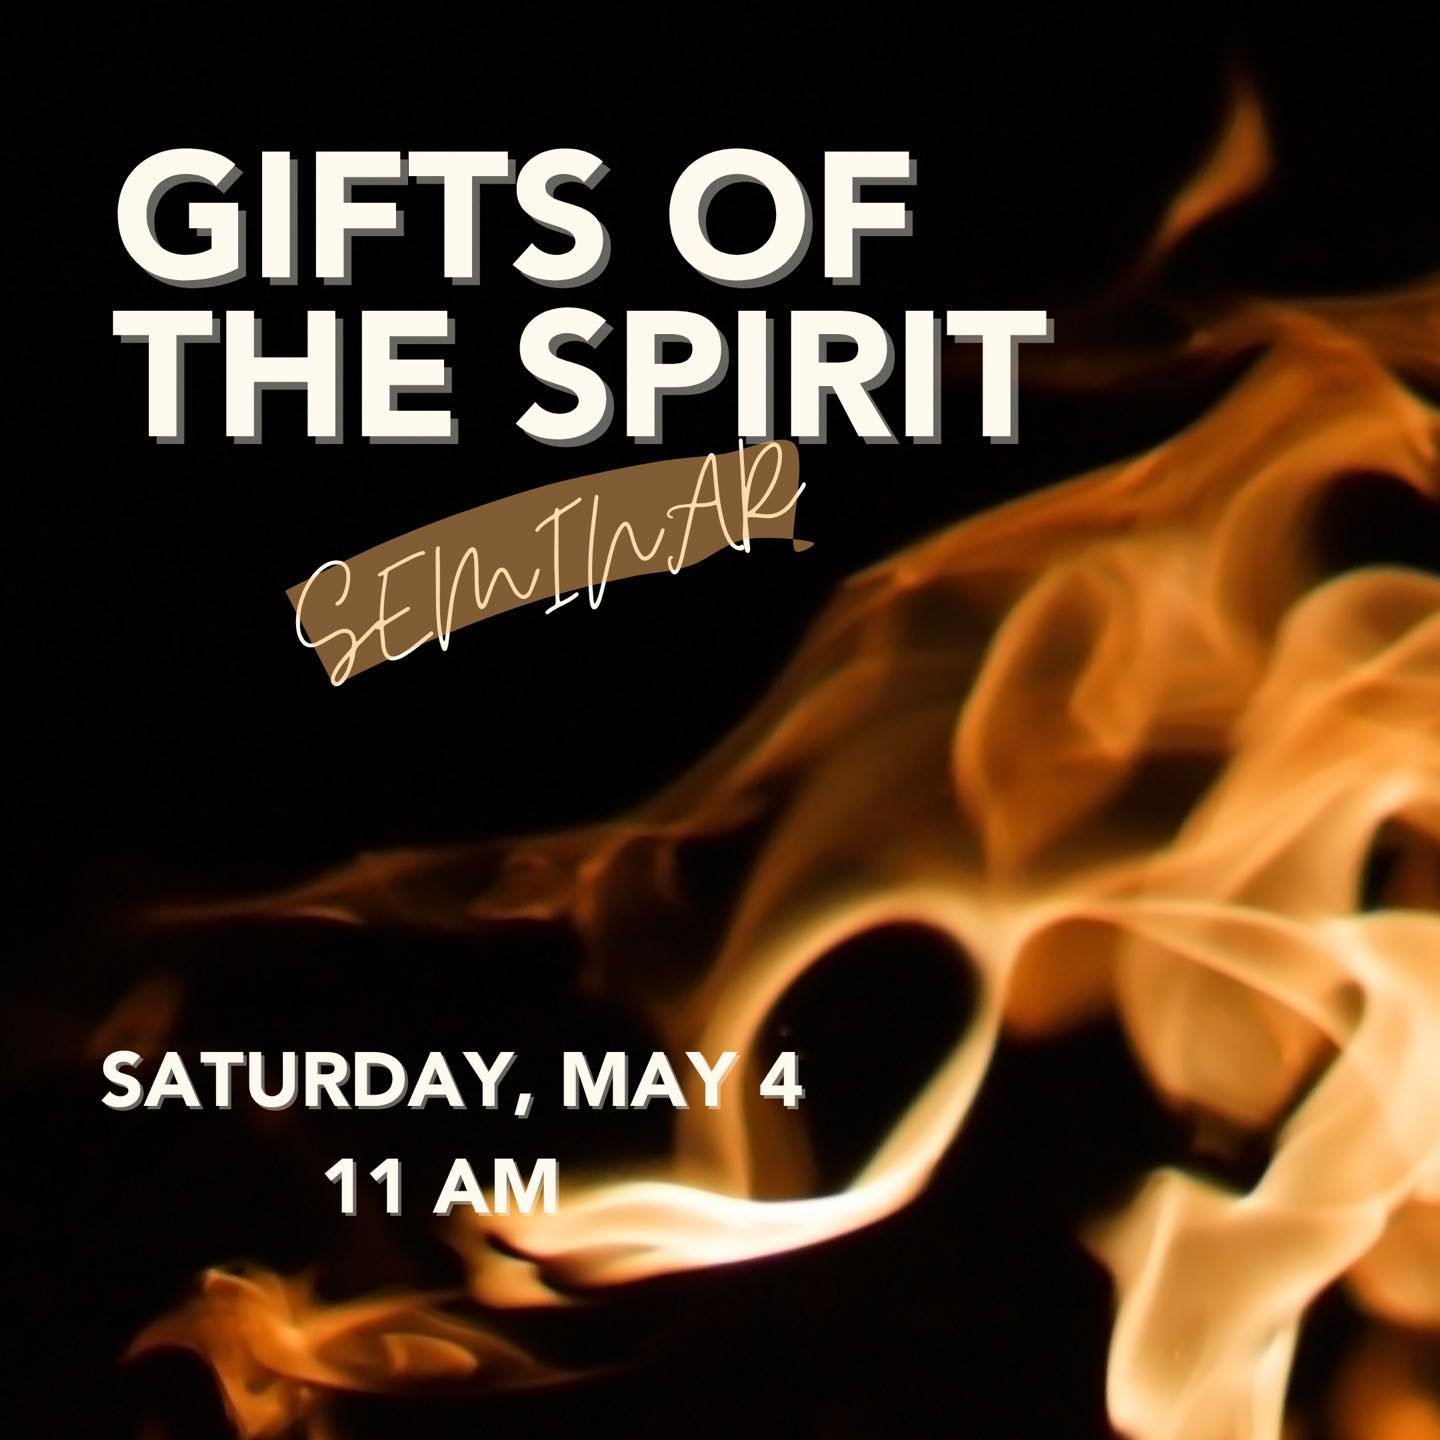 This past Sunday we finished up our sermon series on the gifts of the Holy Spirit and how they are for the church today.  We have learned a lot but we&rsquo;ve only scratched the surface! Join us this Saturday May 4th at 11am in the sanctuary for a G